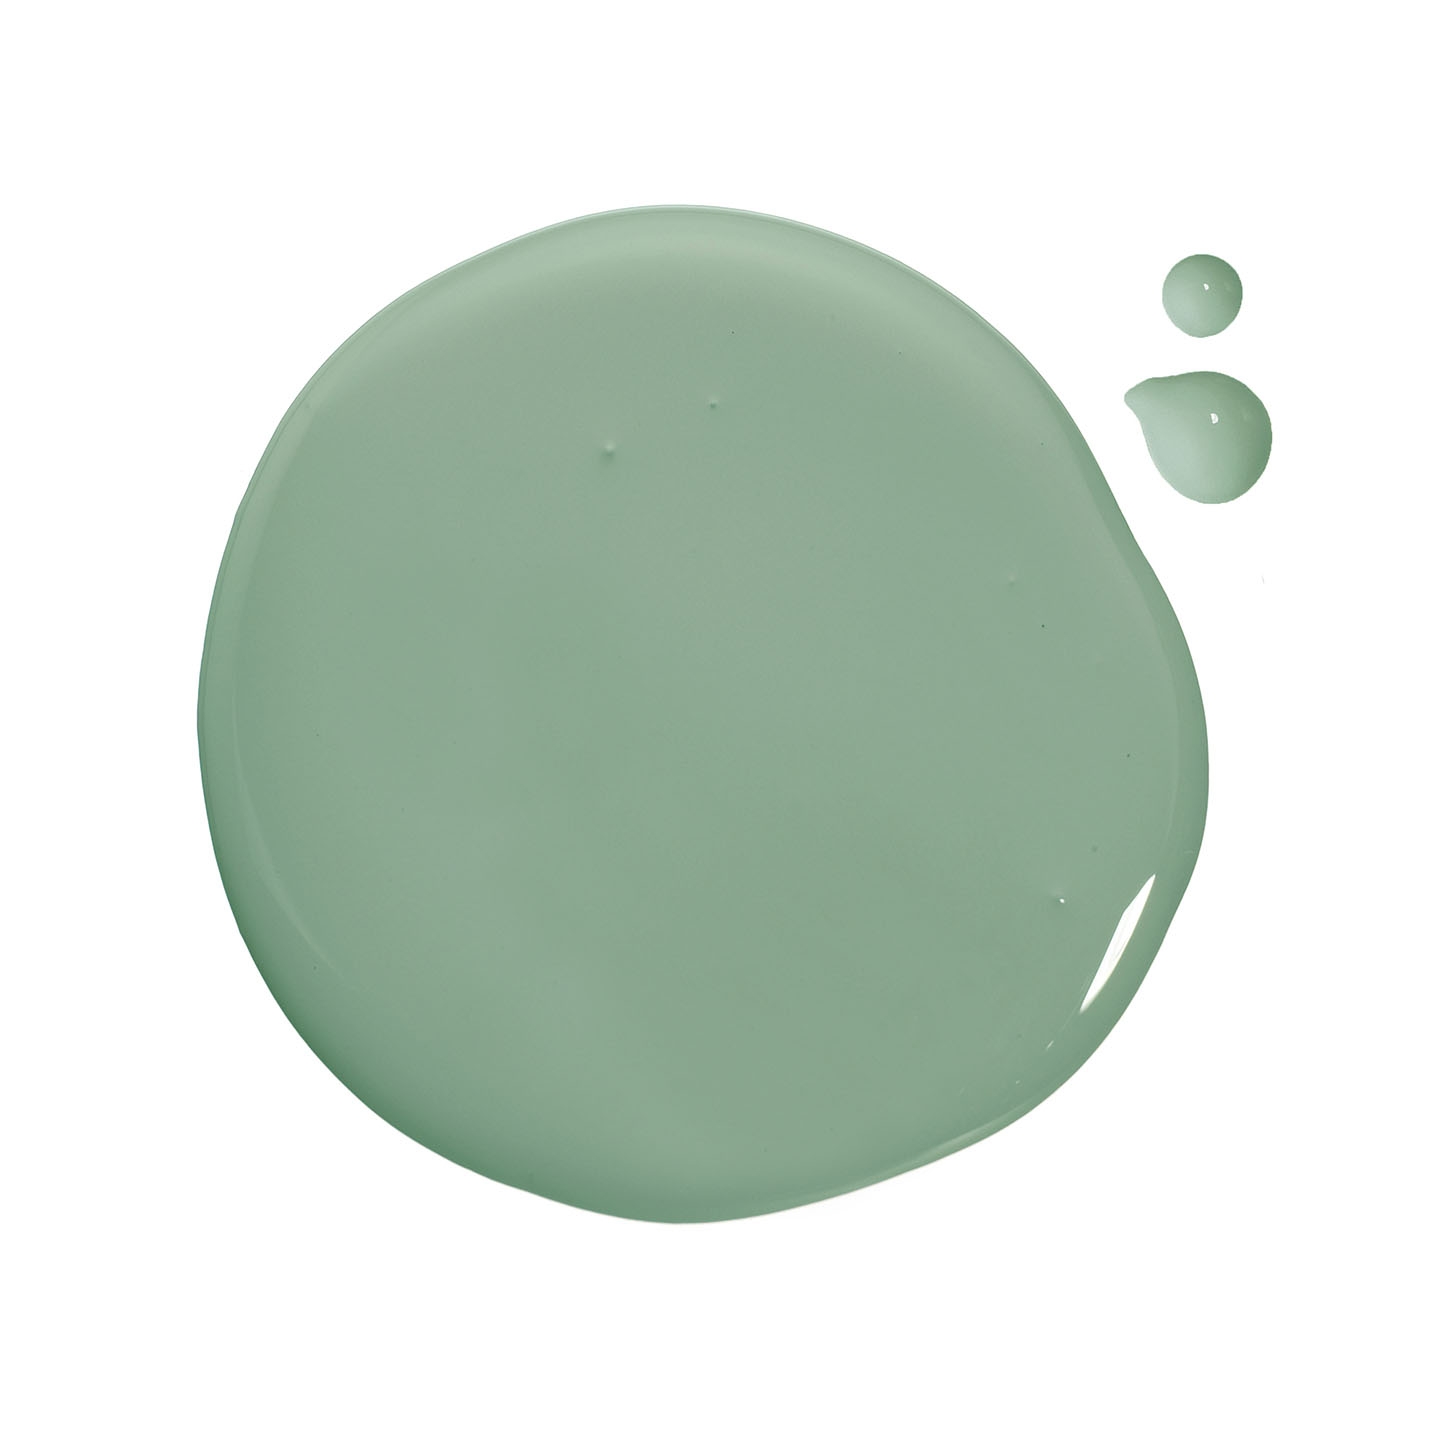 OMGreen Swatch - Image 0